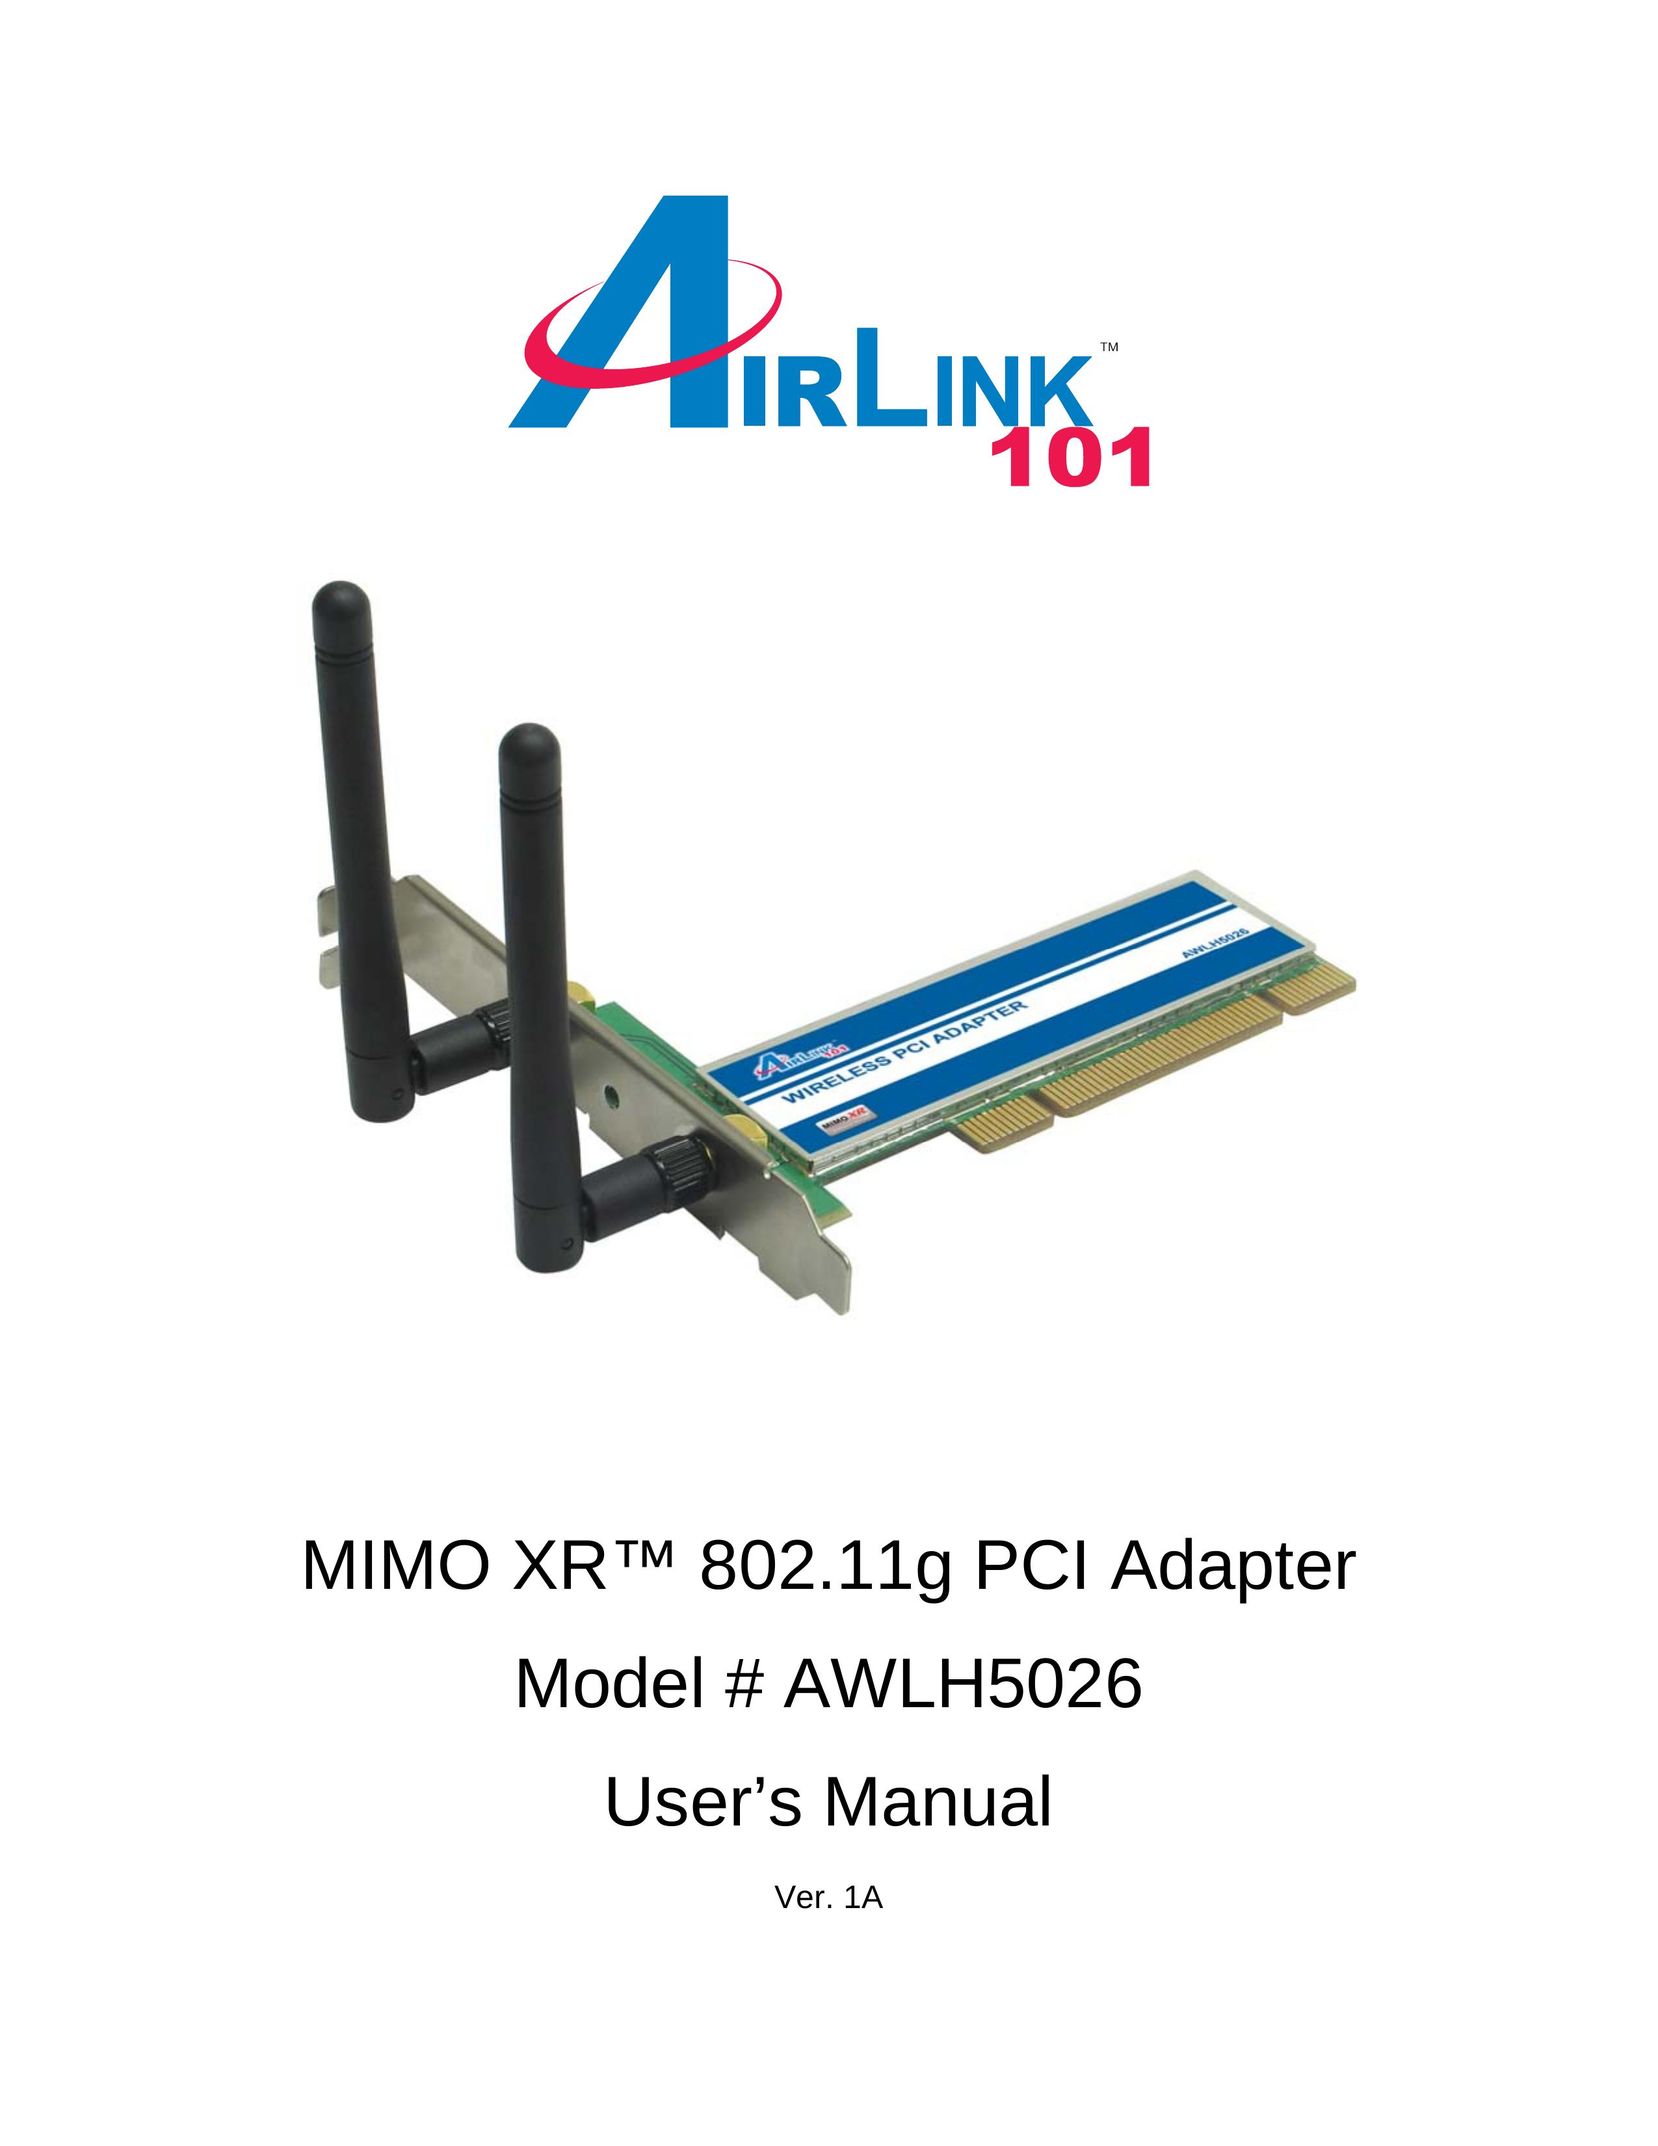 Airlink101 AWLH5026 Network Card User Manual